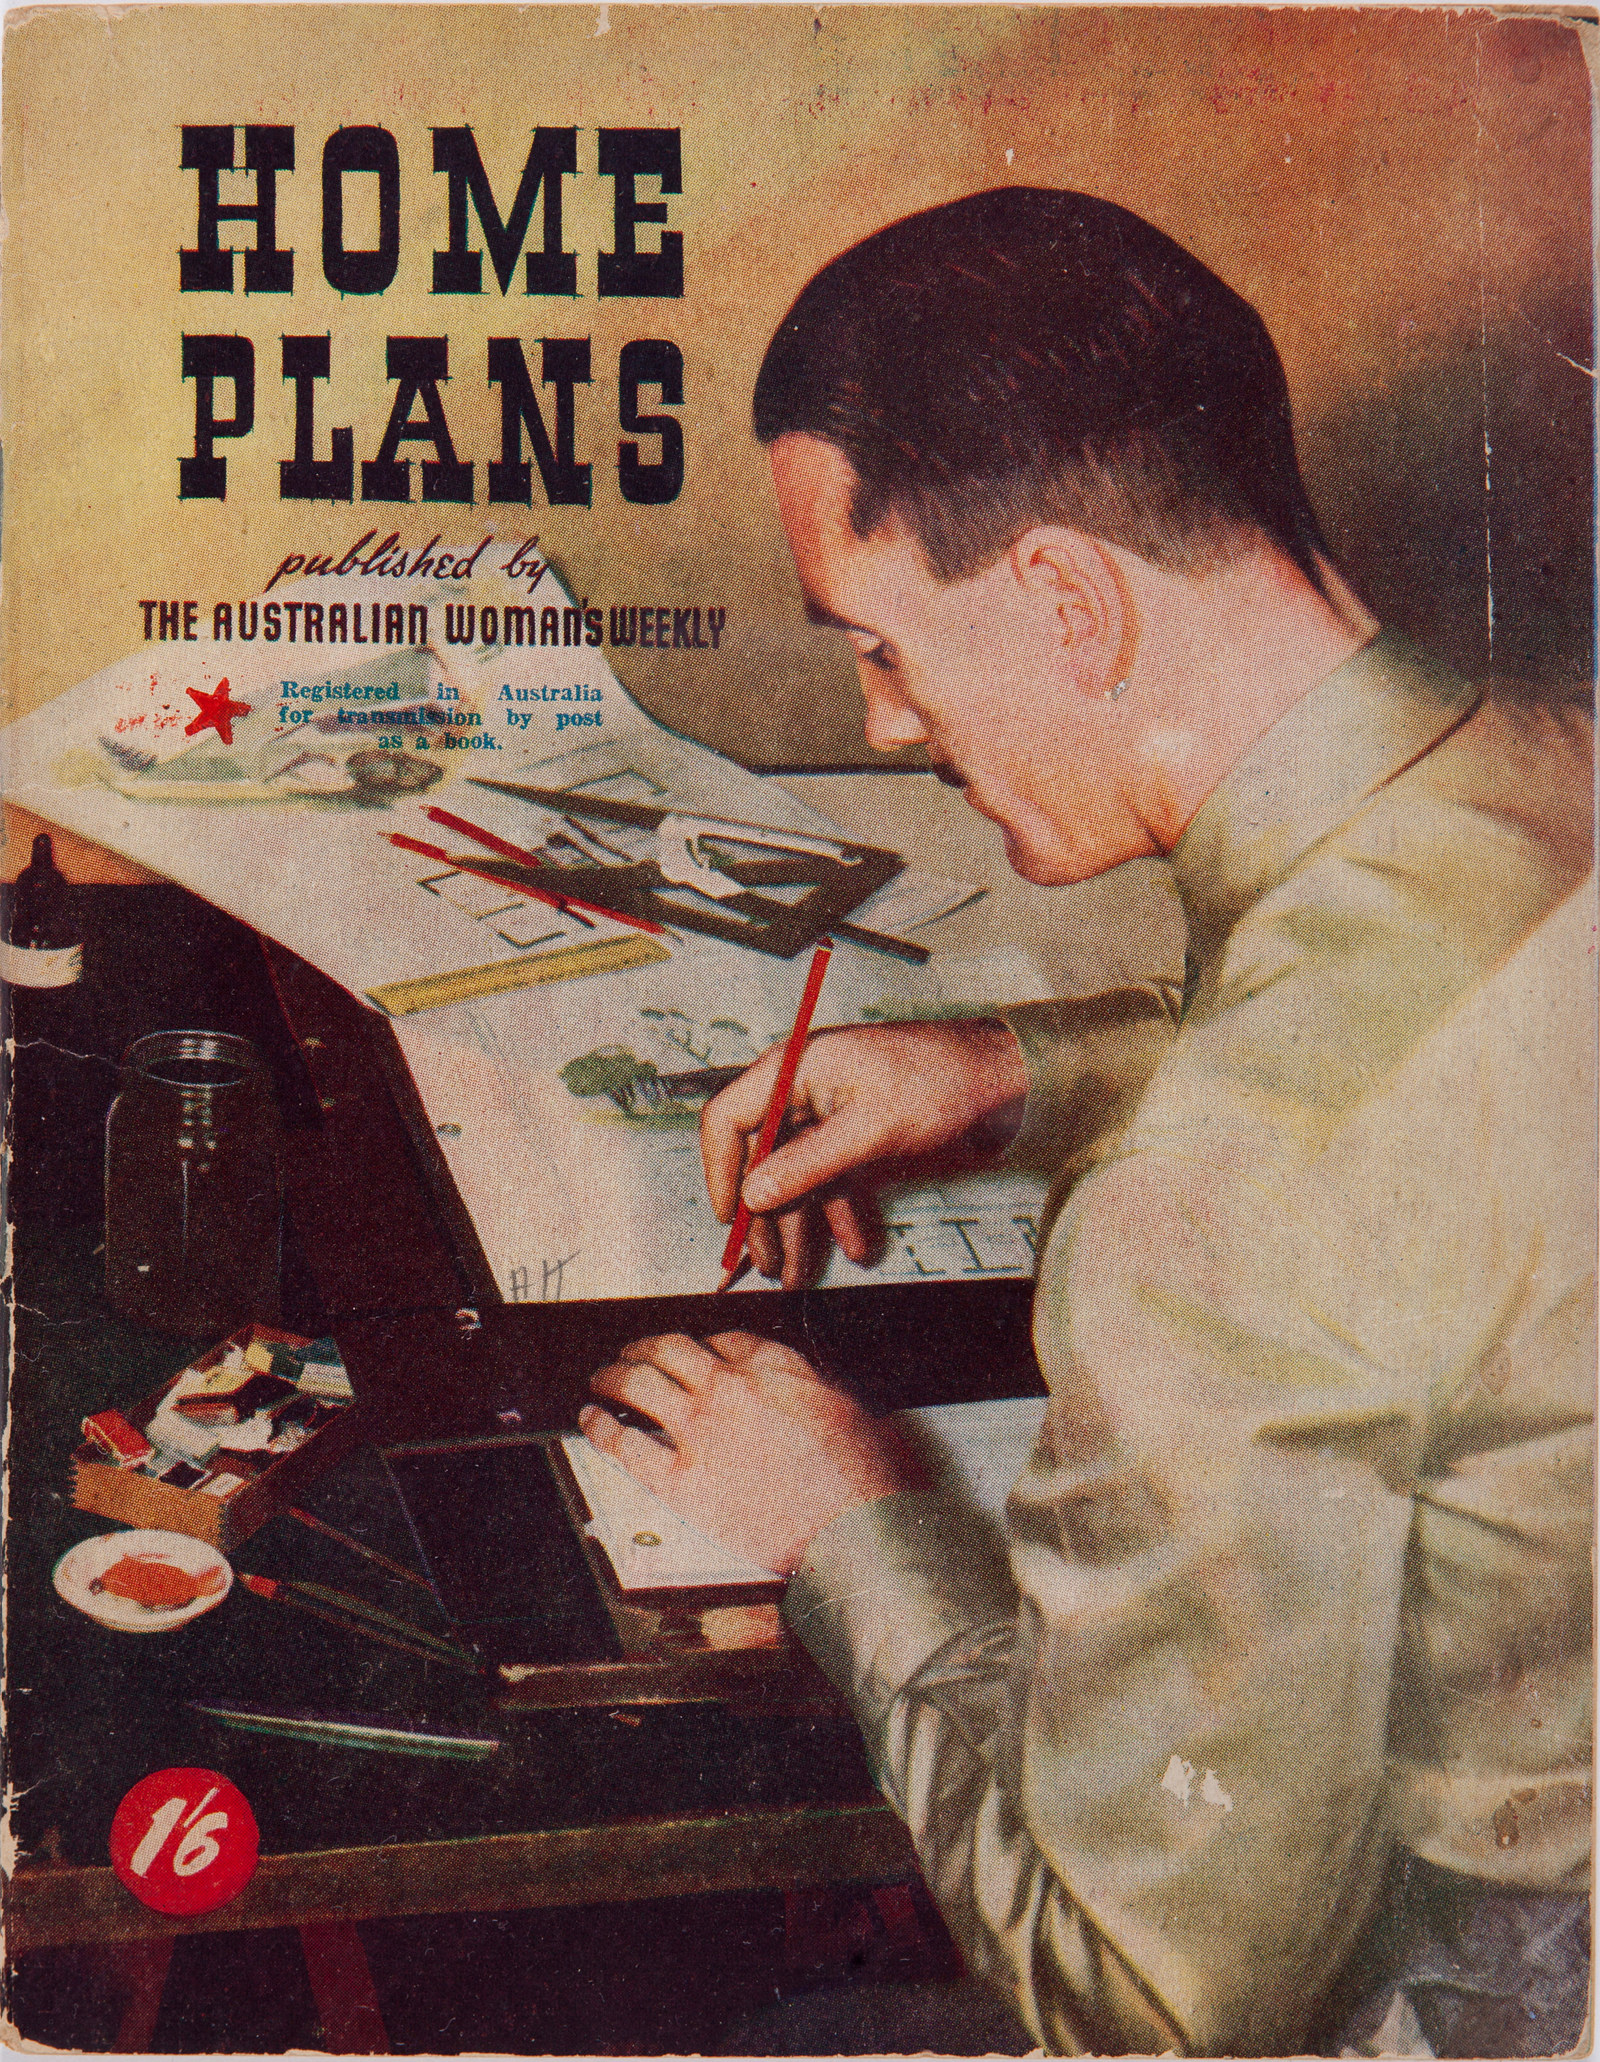 Cover of book, with title Home Plans. Illustration of man sitting at desk drawing plans.